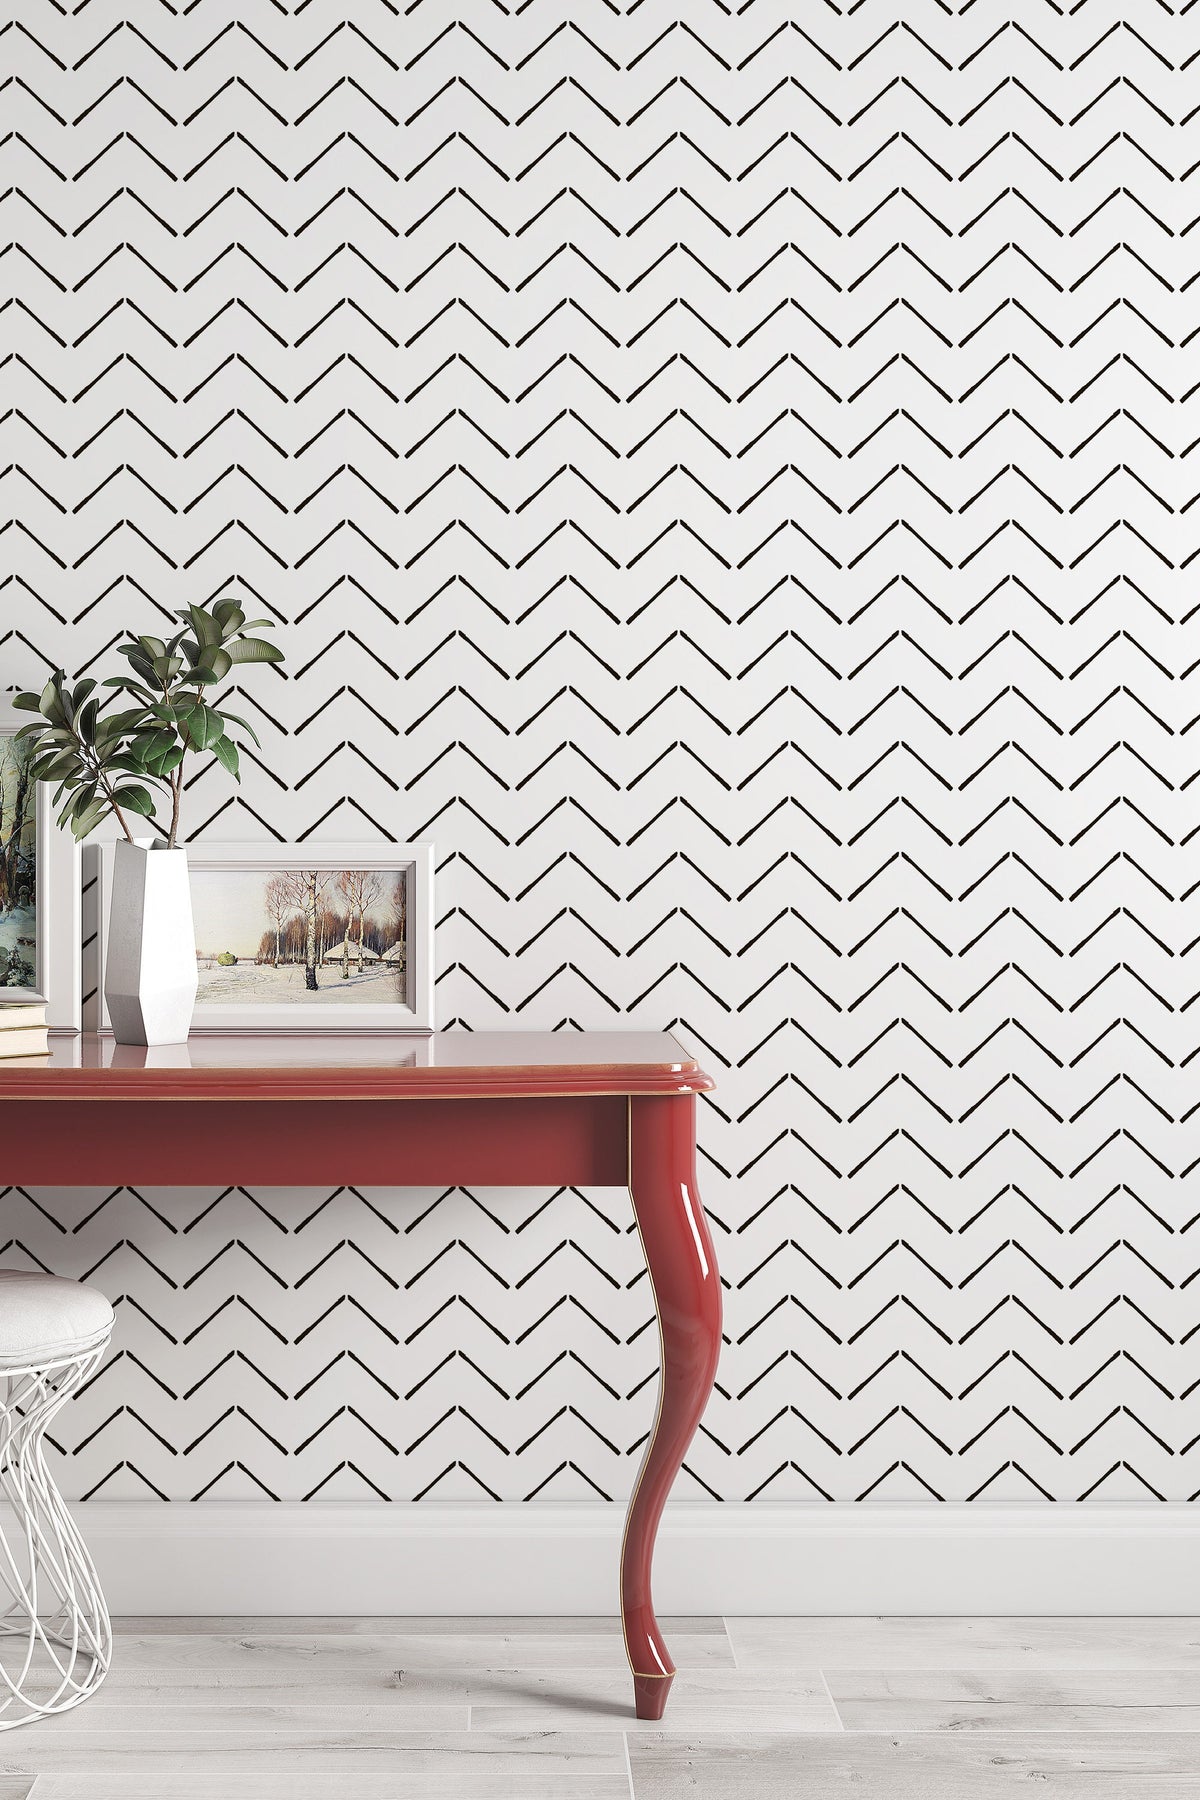 RoomMates Chevron Stripe Peel and Stick Wallpaper Covers 2818 sq ft  RMK11807WP  The Home Depot